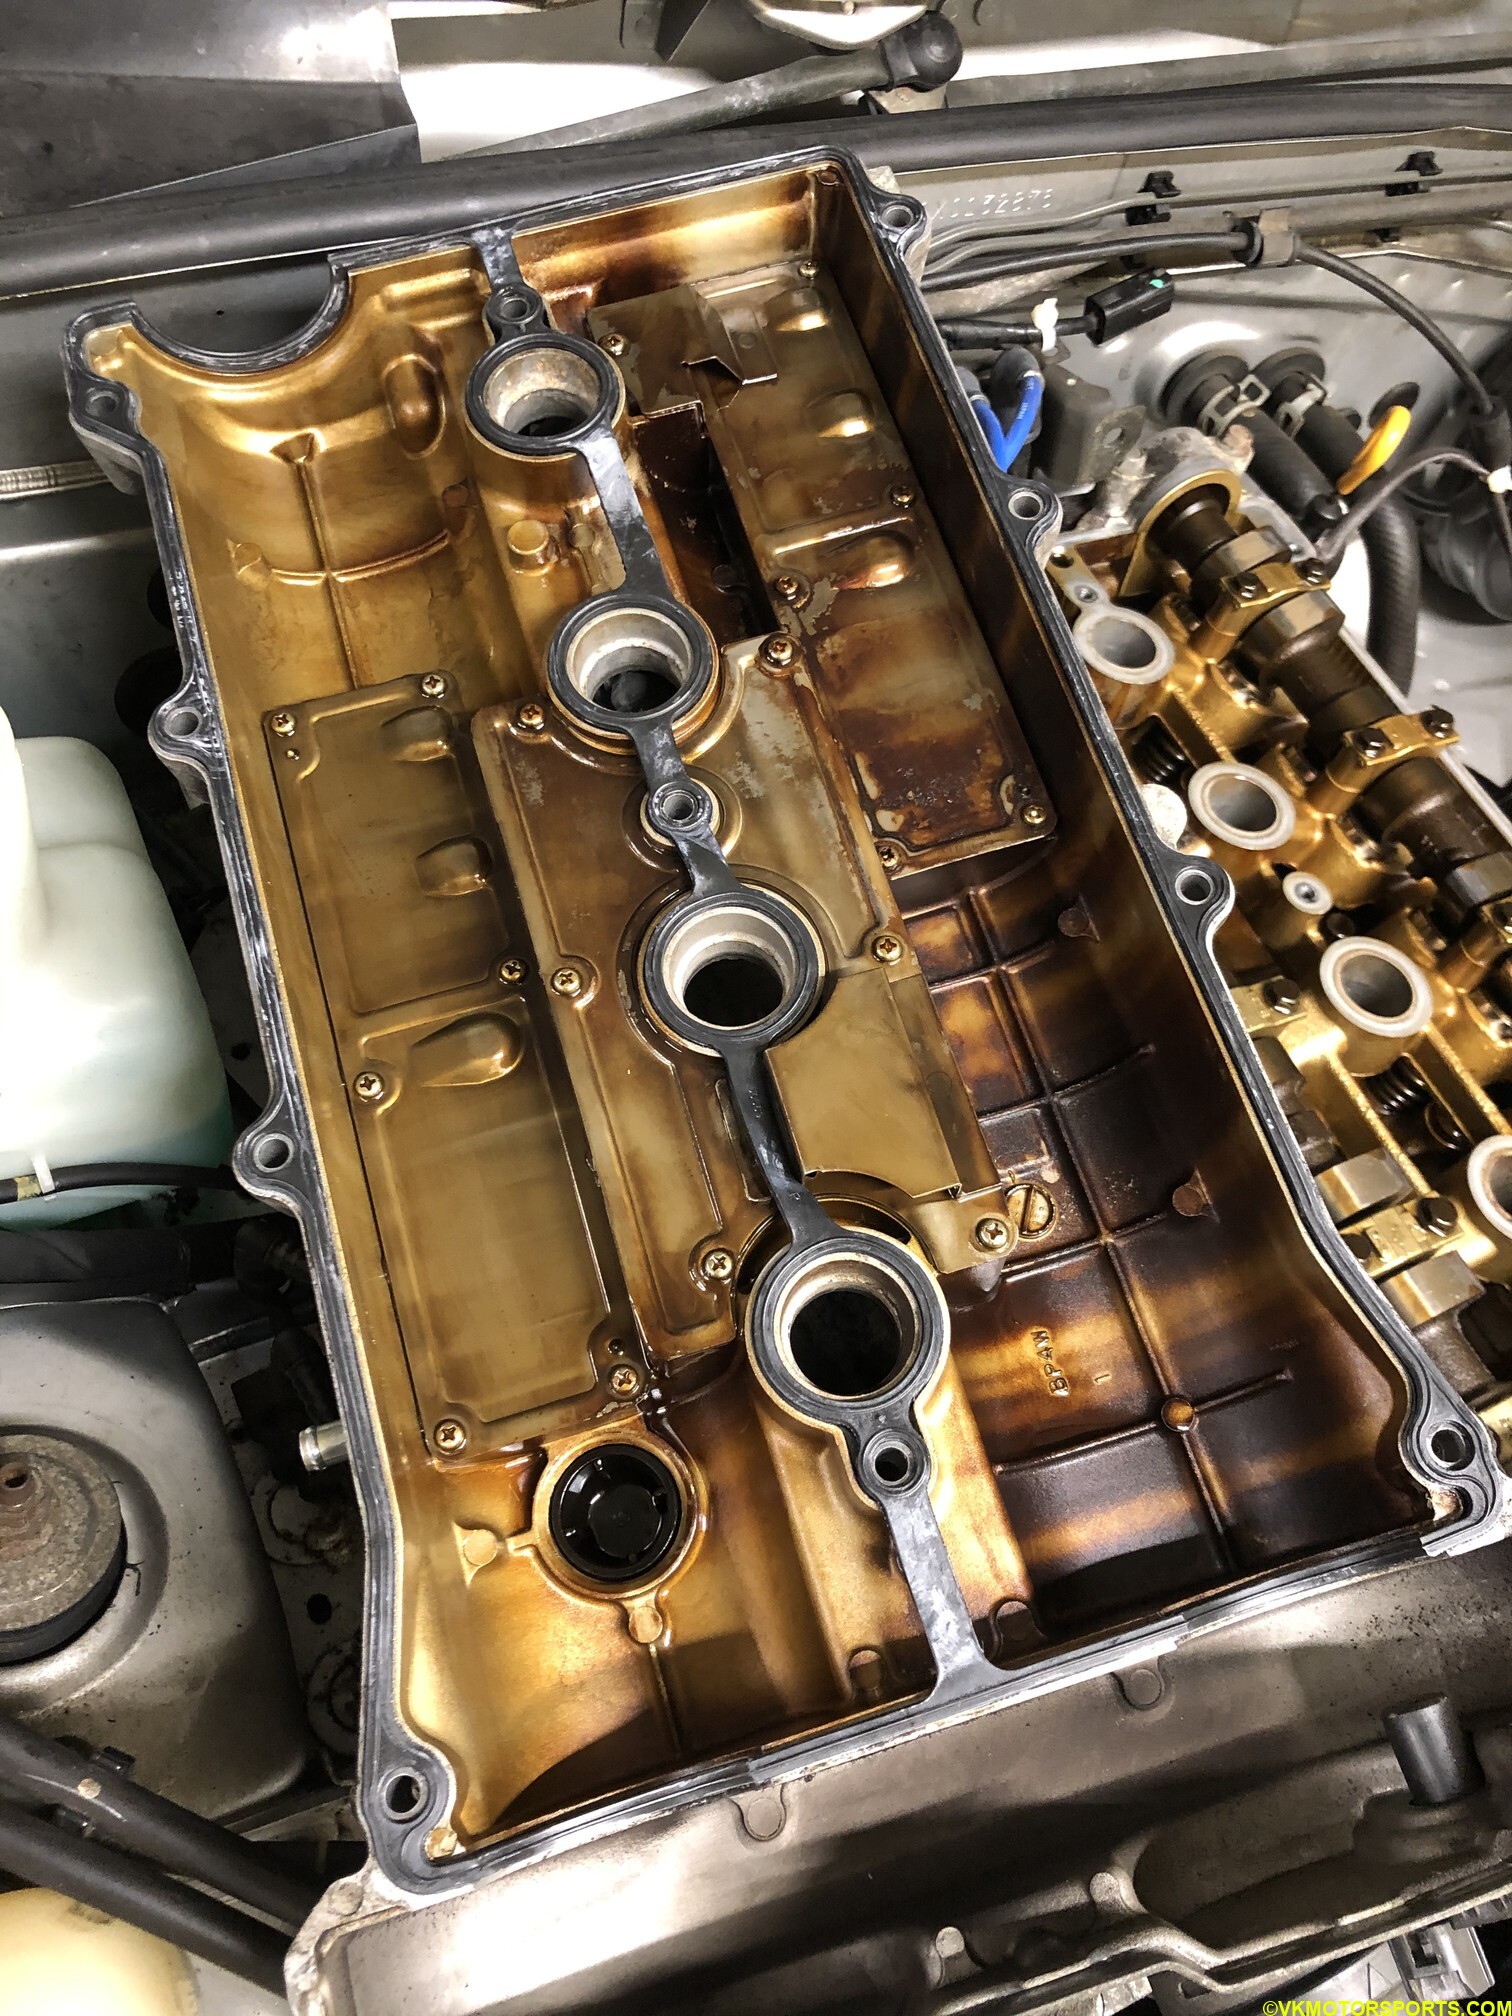 Figure 16. Install new gasket inside the valve cover